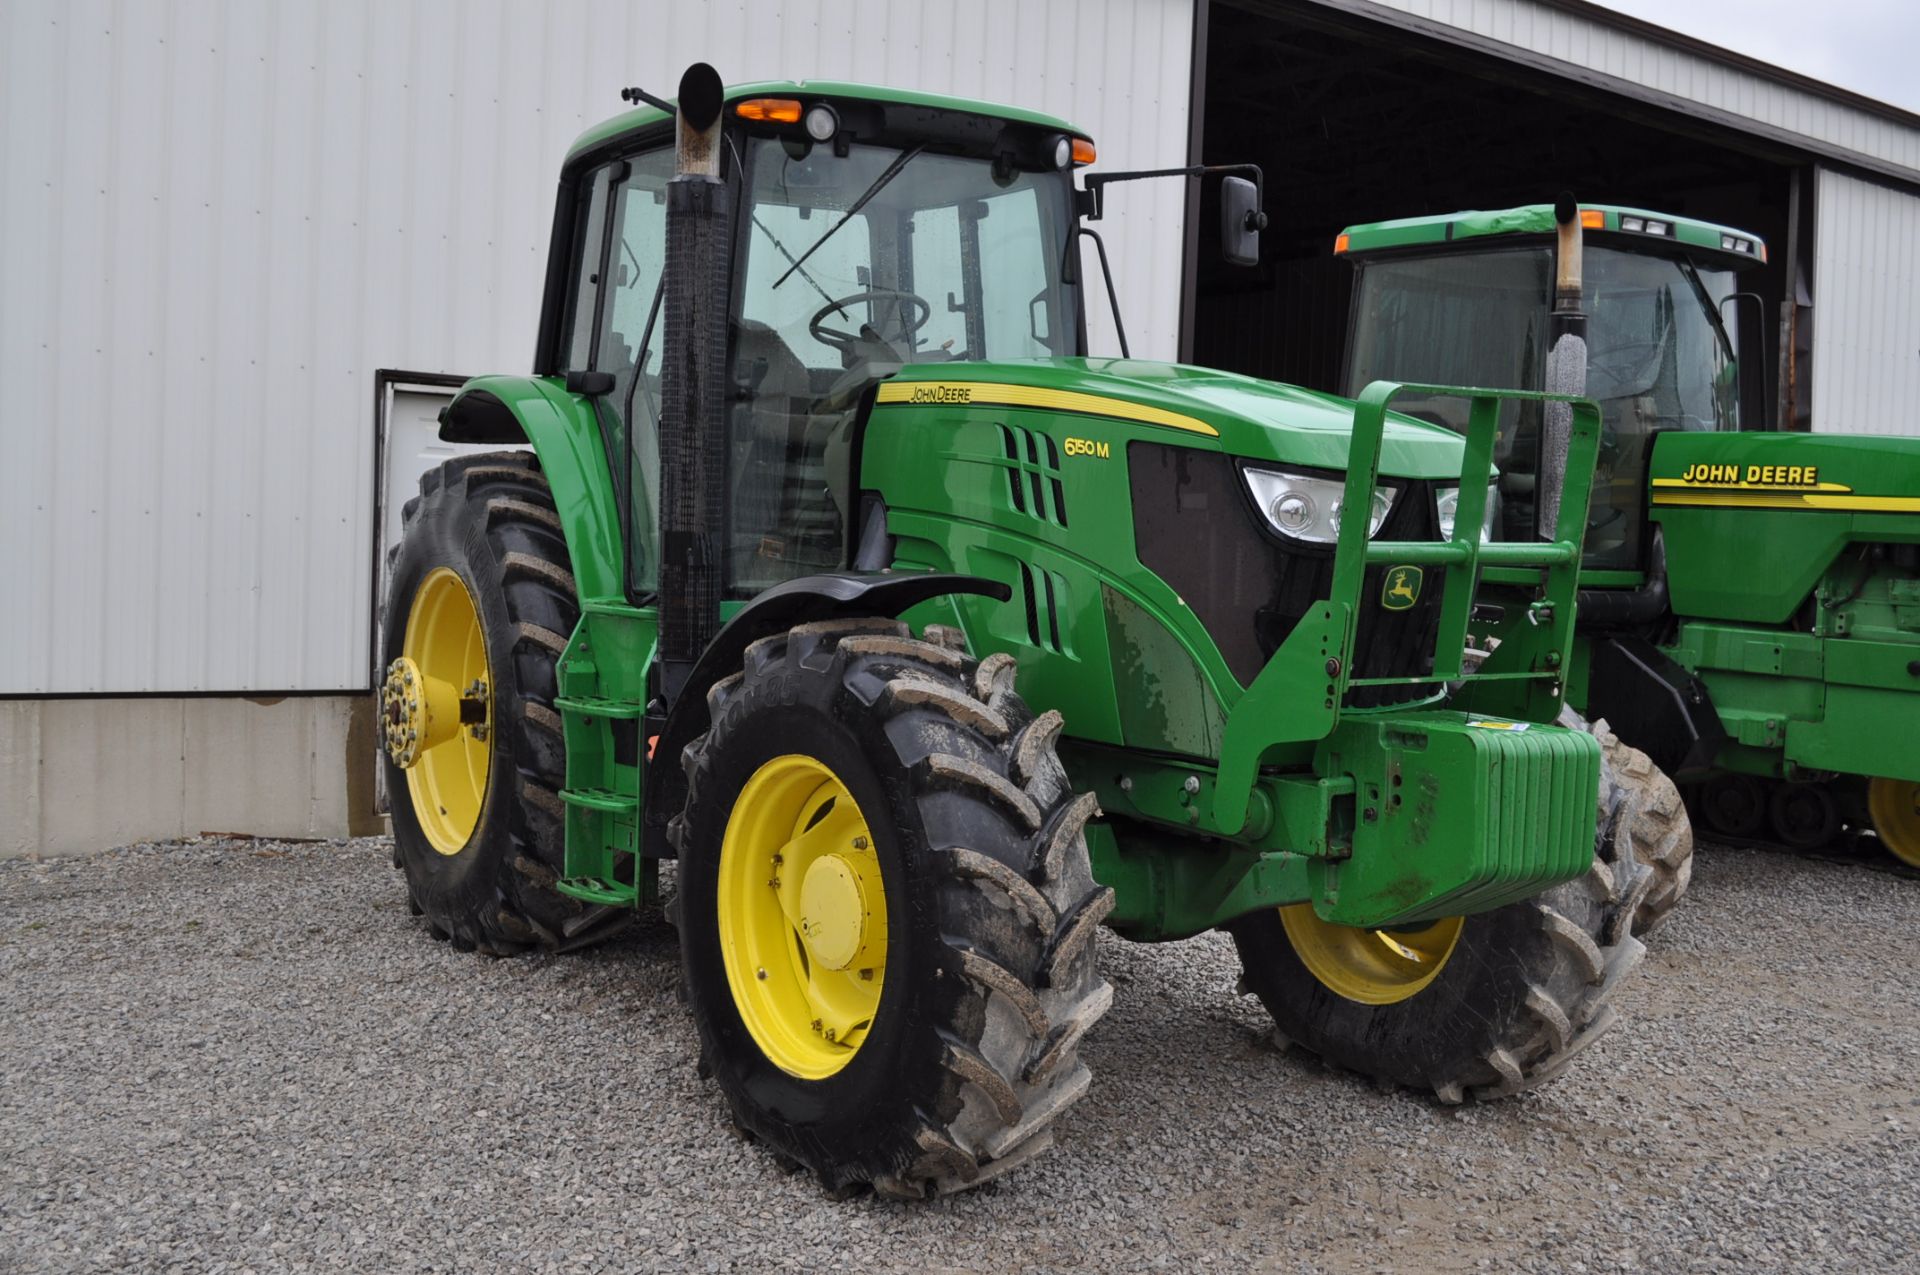 John Deere 6150M tractor, MFWD, C/H/A, 620/85 R 38 rear, 420/85 R 28 front, front fenders, - Image 2 of 20